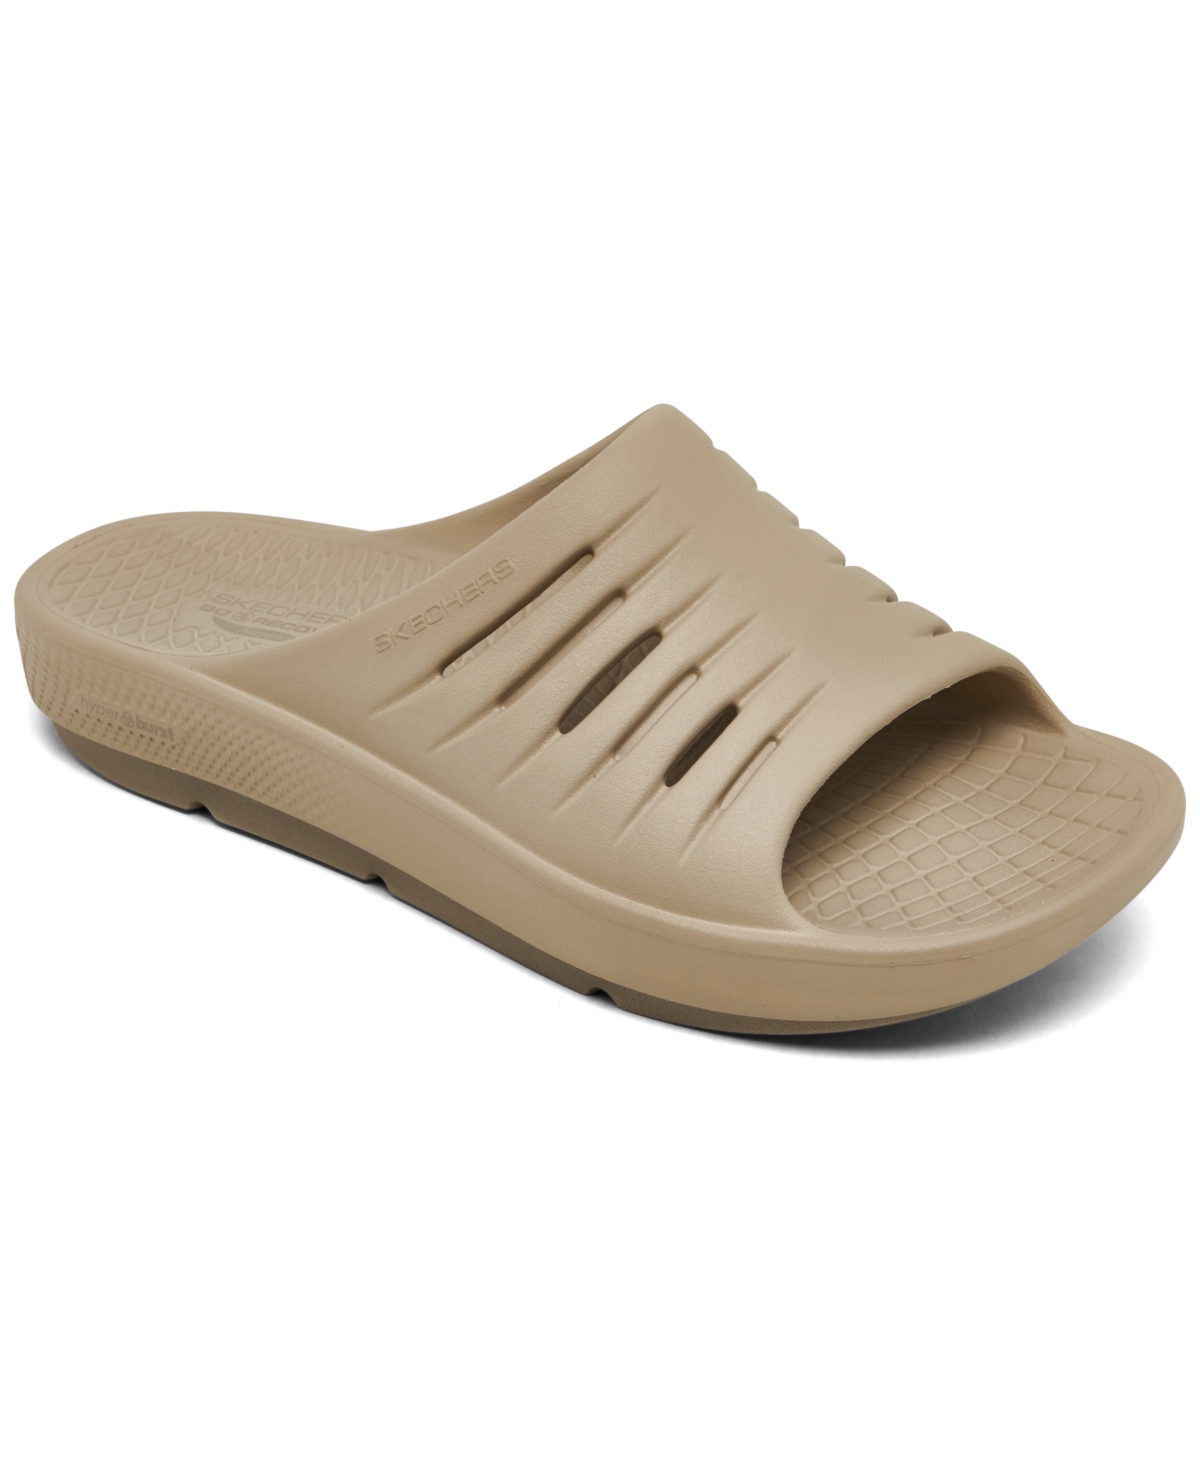 Women's Go Recover Refresh Slide Sandals from FInish Line - Taupe